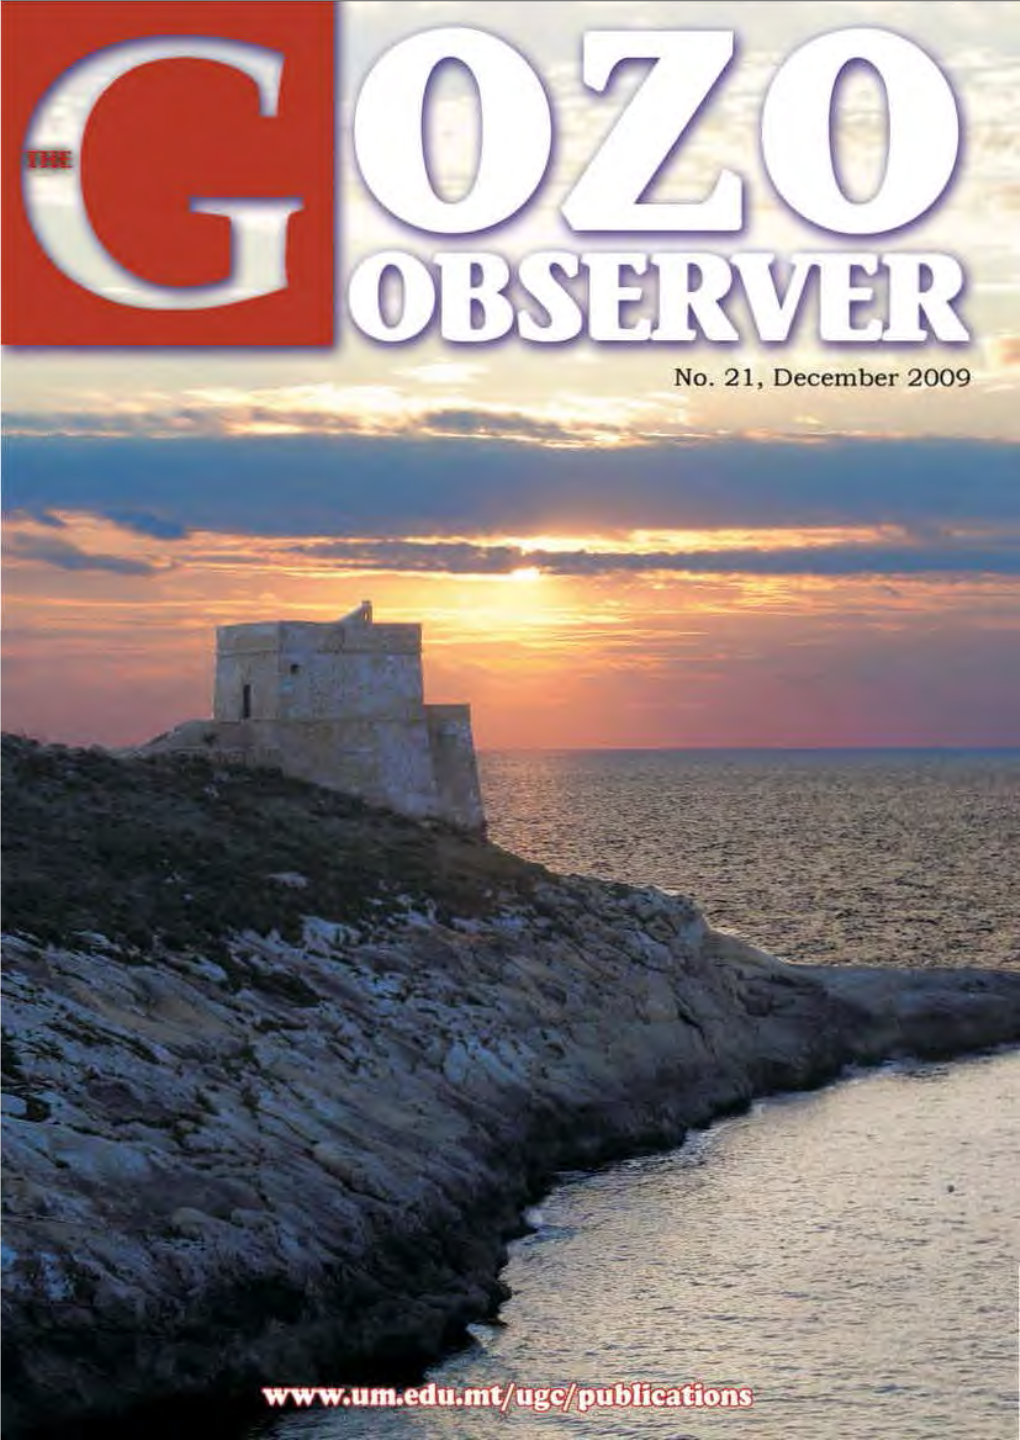 The Gozo Observer Printing: the Journal of the University of Malta - Gozo Campus